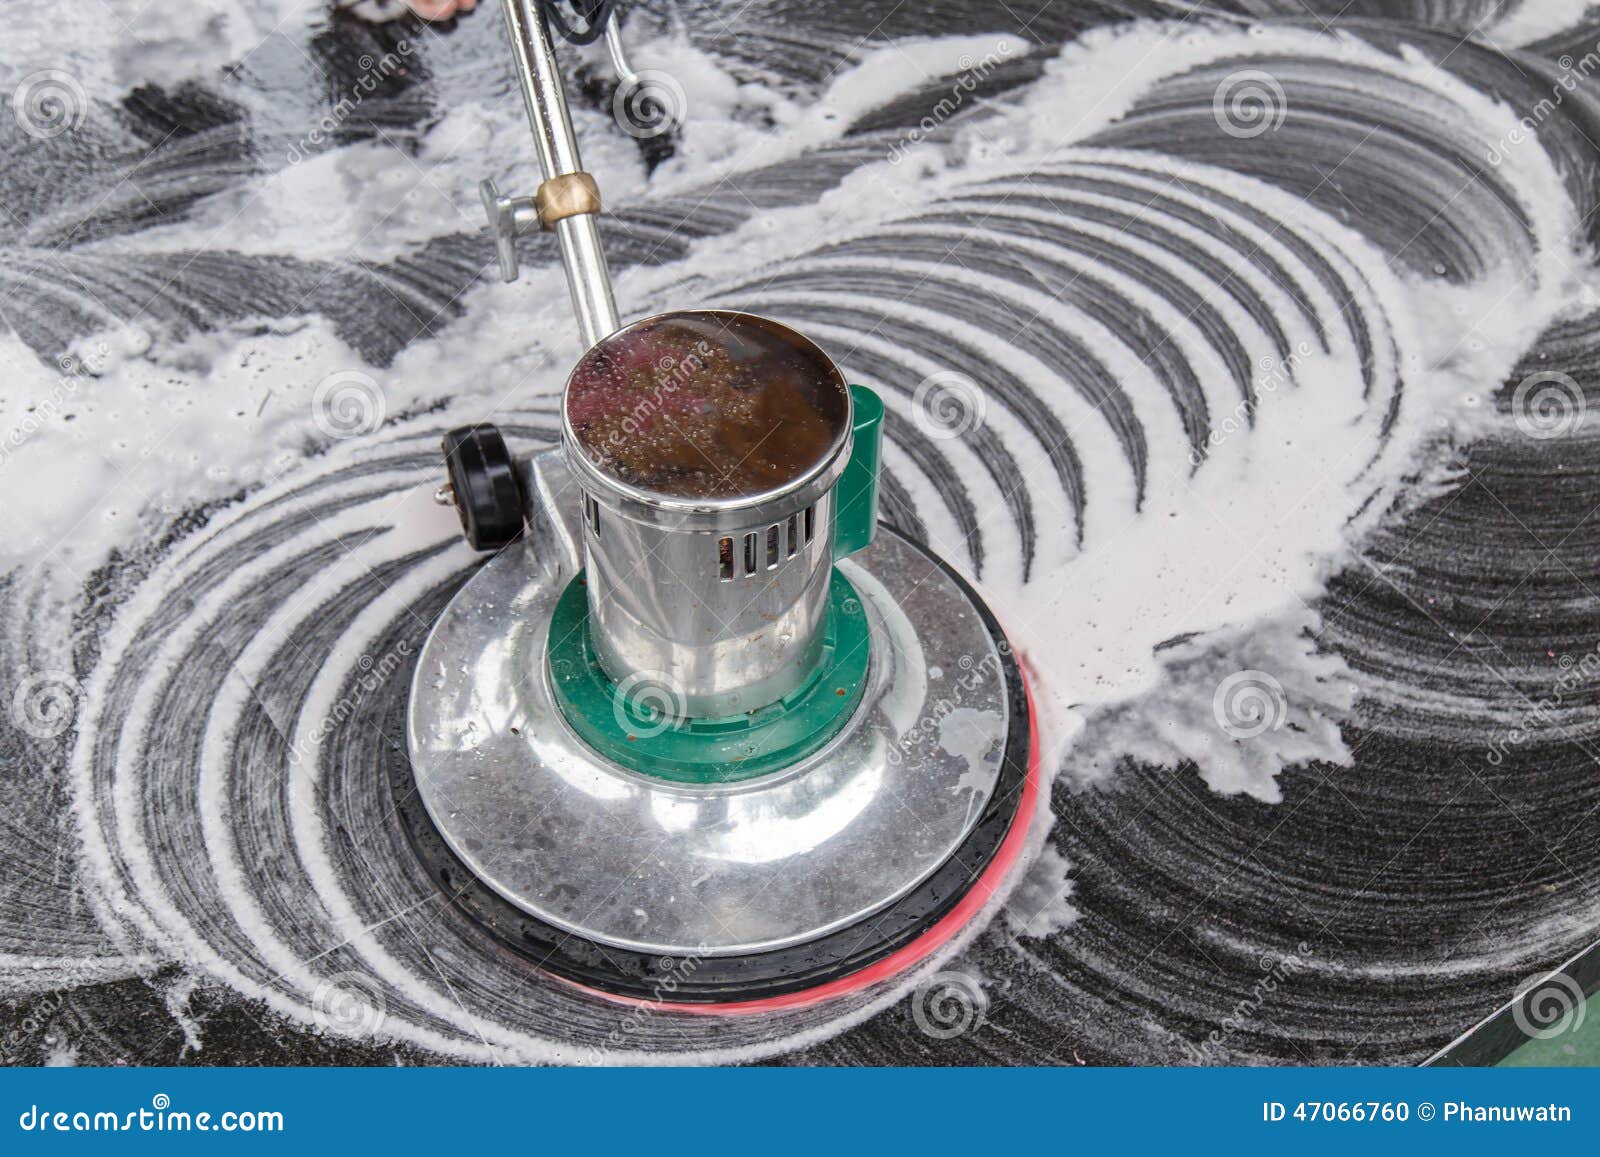 thai people cleaning black granite floor with machine and chemical